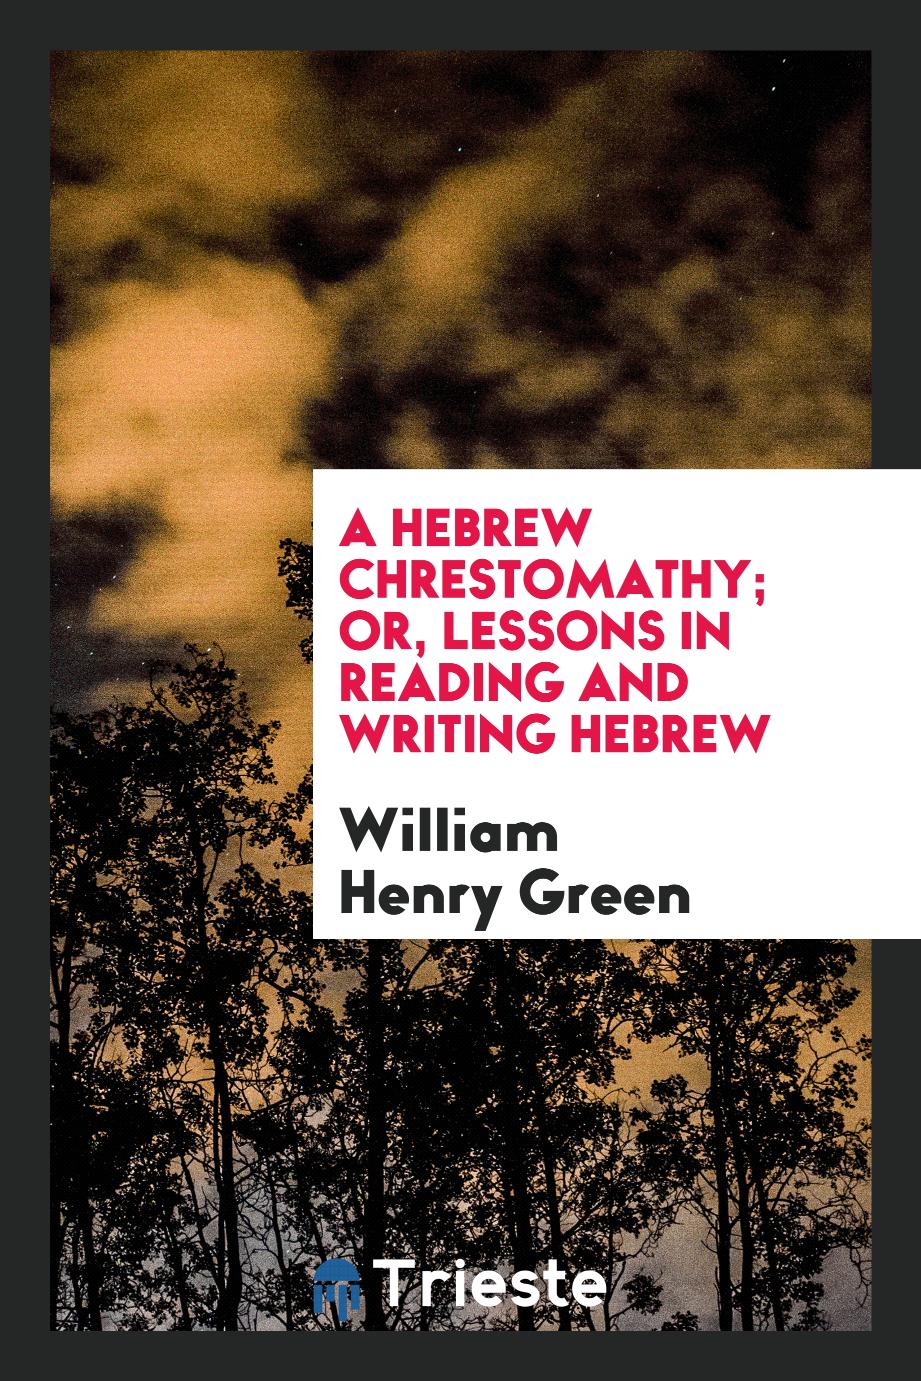 A Hebrew chrestomathy; or, Lessons in reading and writing Hebrew